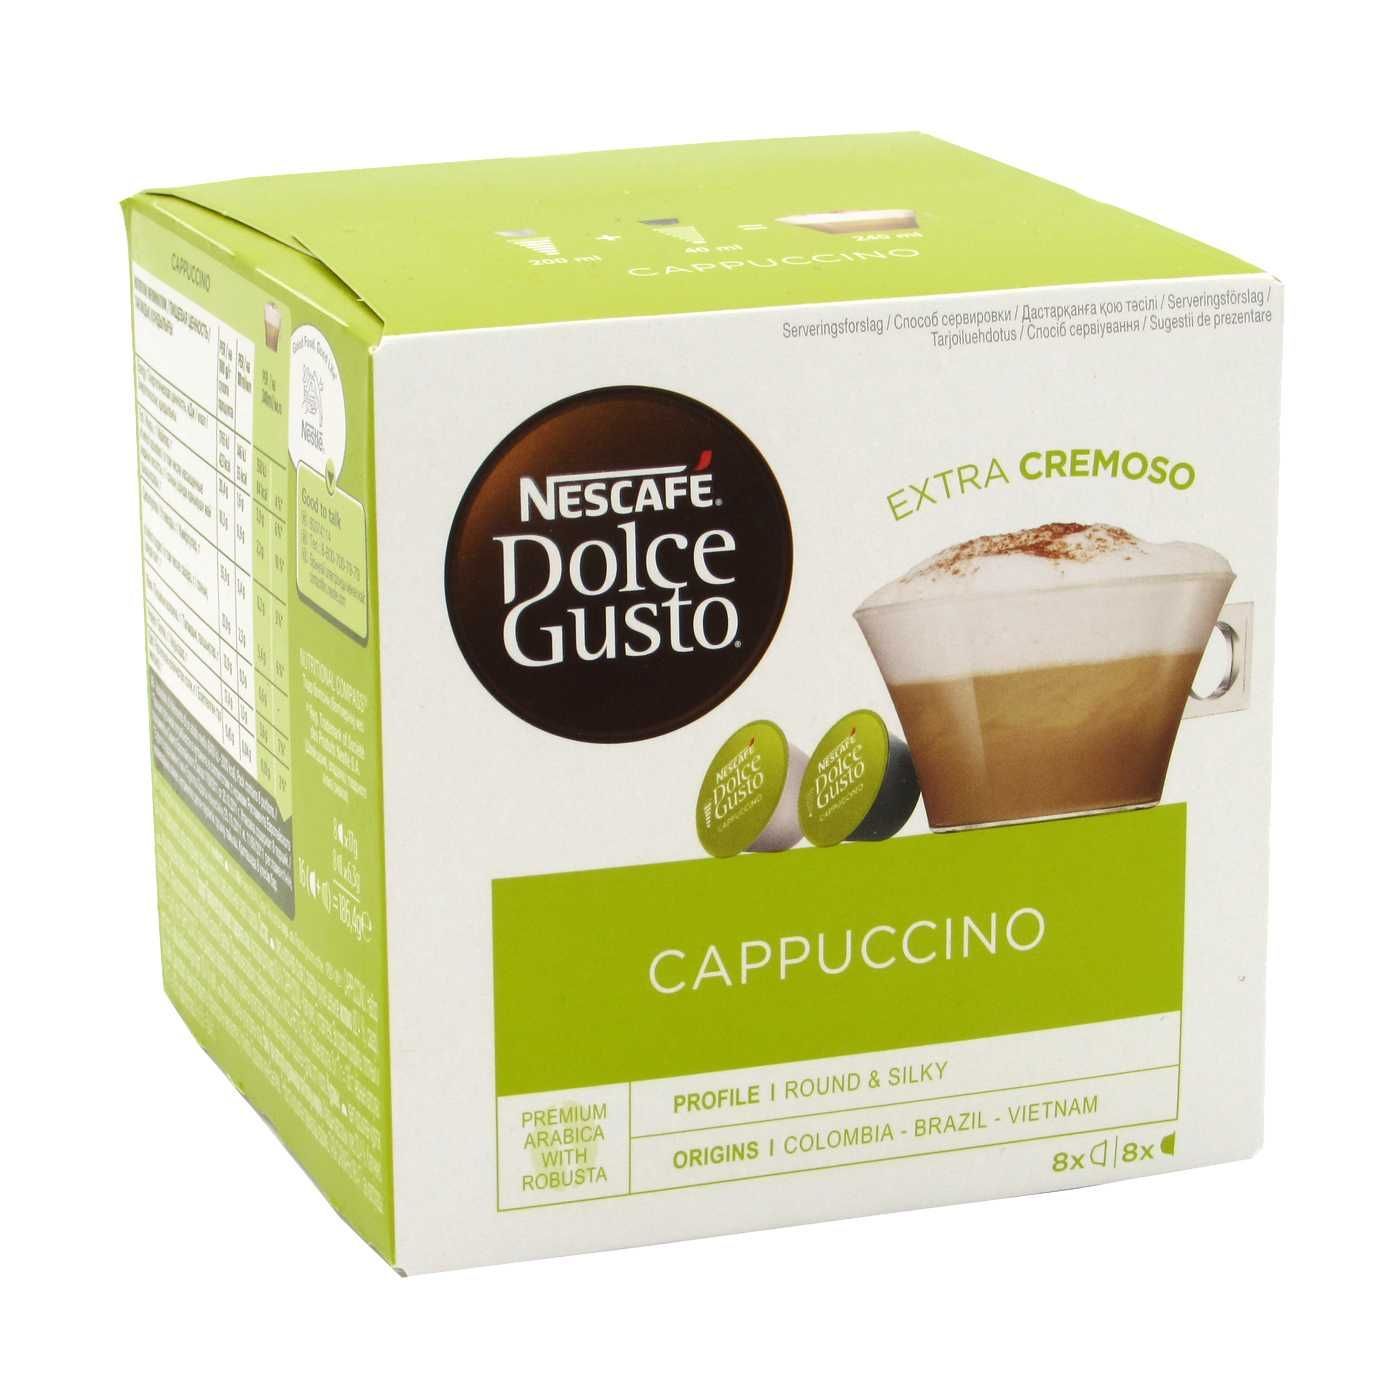 Dolce gusto cappuccino. Капсулы Dolce gusto Cappuccino. Кофе в капсулах Dolce gusto Cappuccino 16 шт.. Кофе Нескафе Дольче густо капсулы капучино. Капсулы Дольче густо капучино.